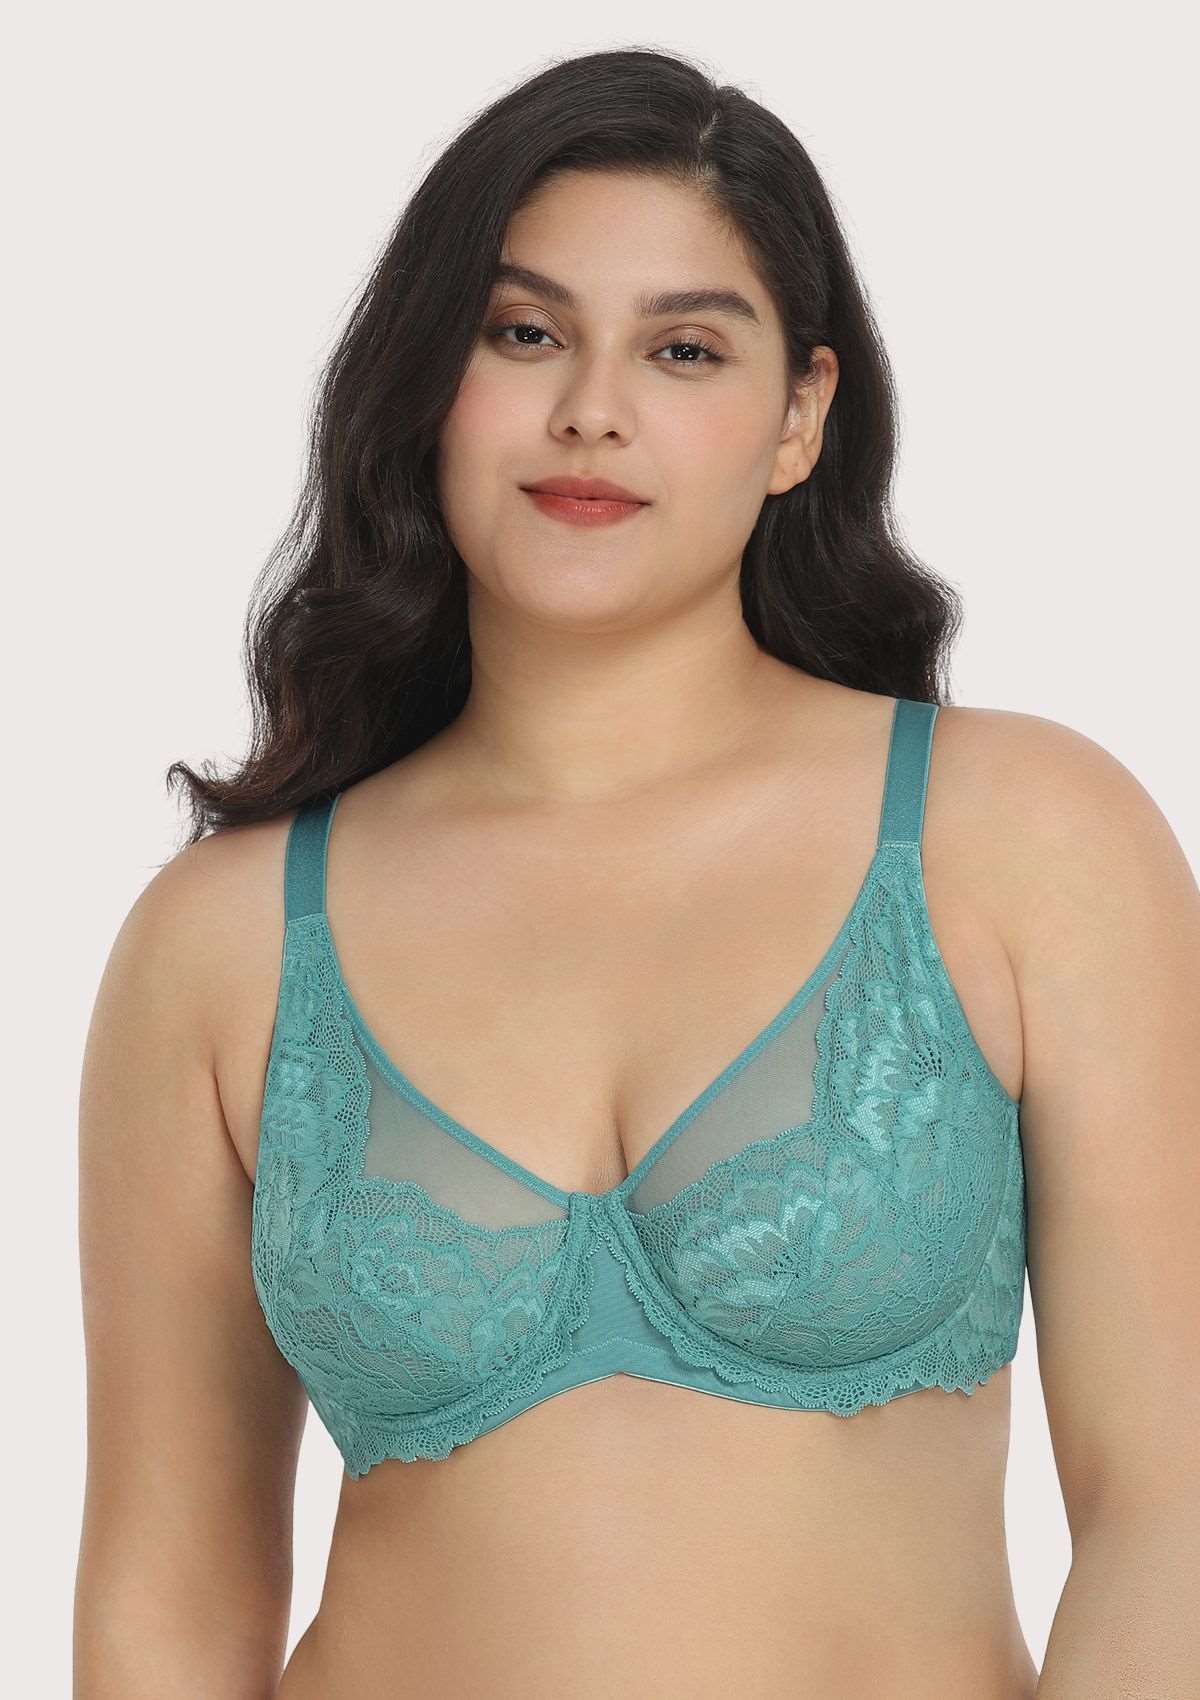 HSIA Paeonia Lace Full Coverage Underwire Non-Padded Uplifting Bra - Purple / 42 / C